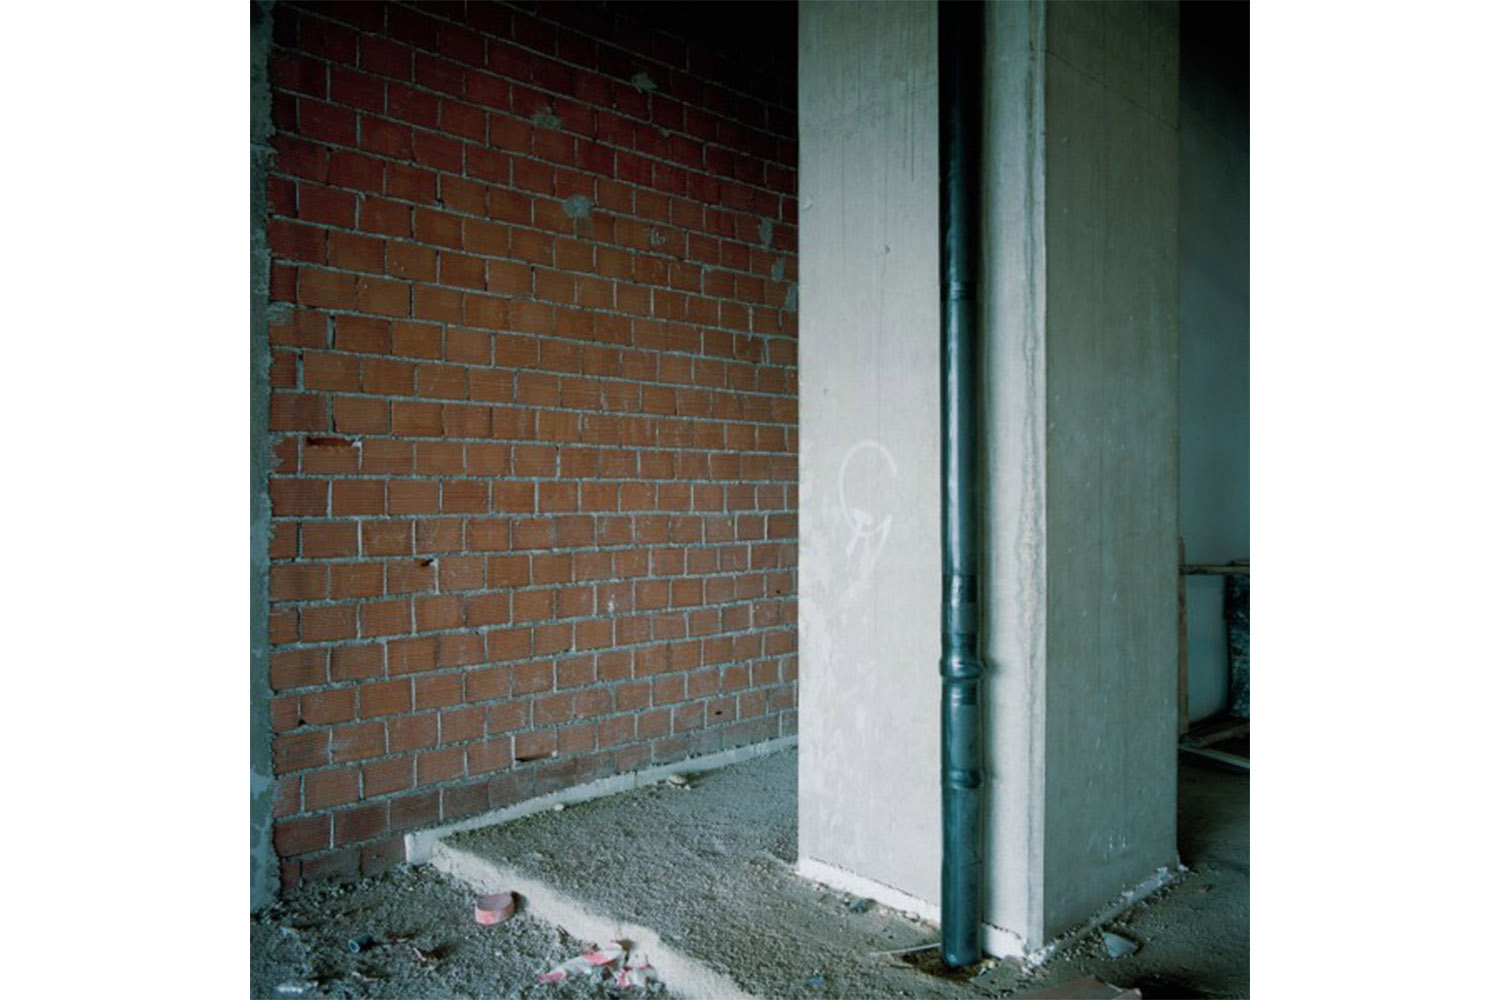 Redeployment_05, from the series ''Future Archeologies'', 2012